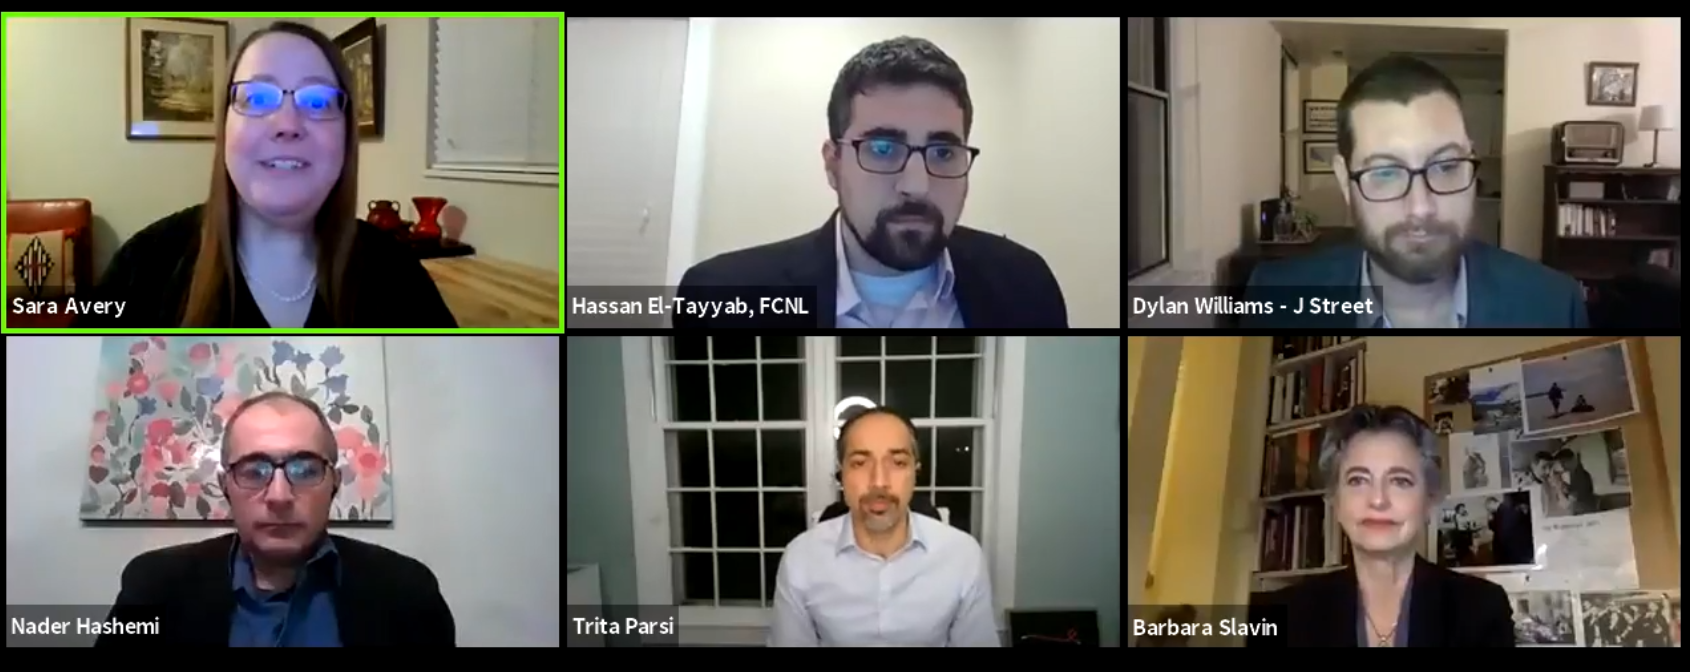 Hassan El-Tayyab joins experts for a Zoom call on Iran. 